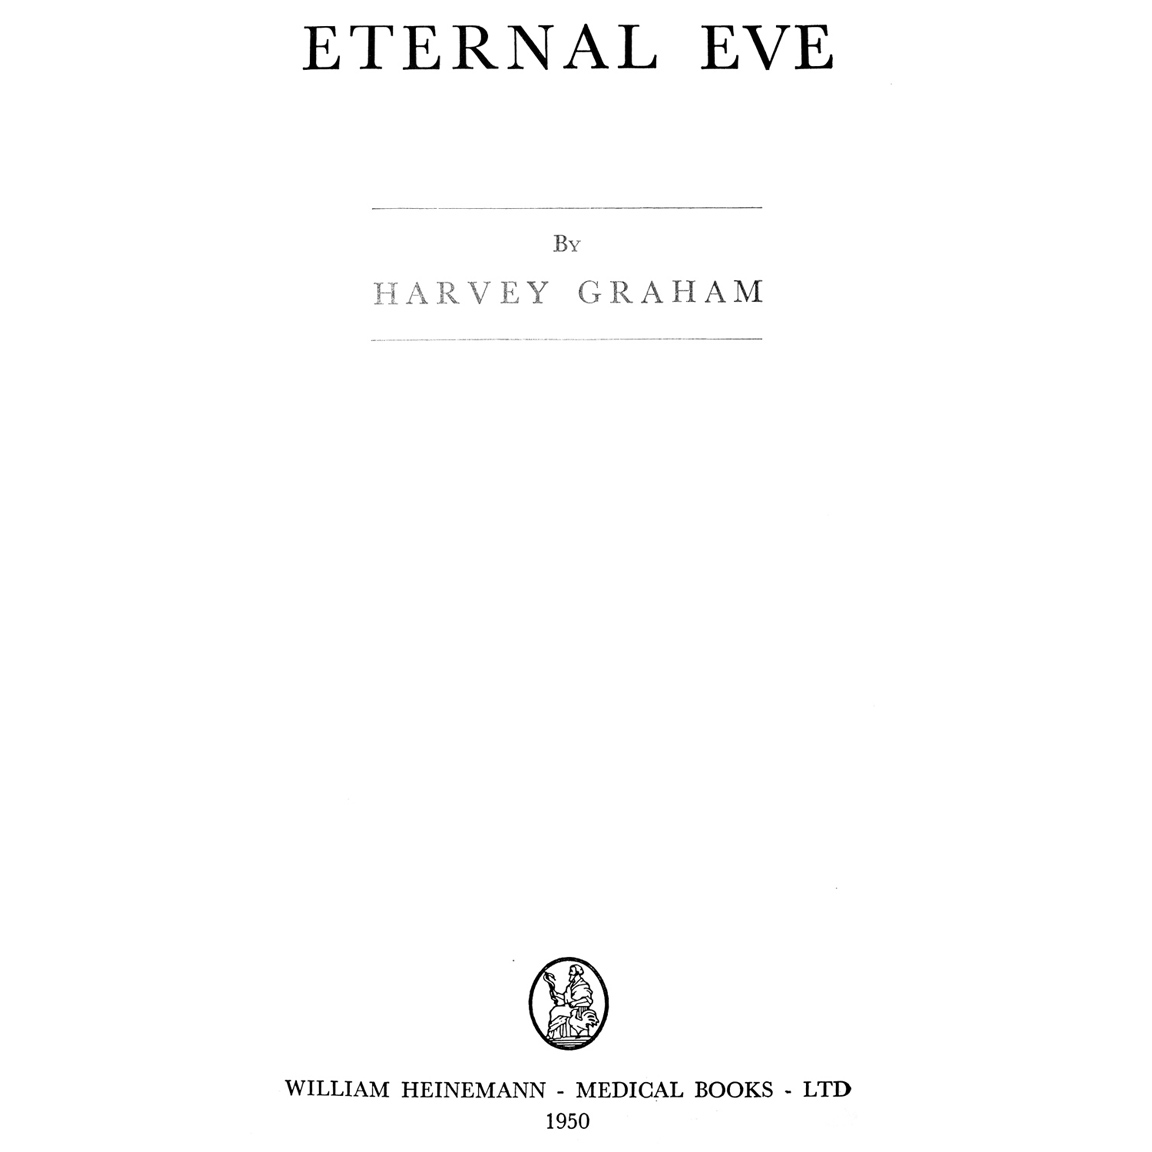 1950-GRAHAM-Eternal Eve-title page